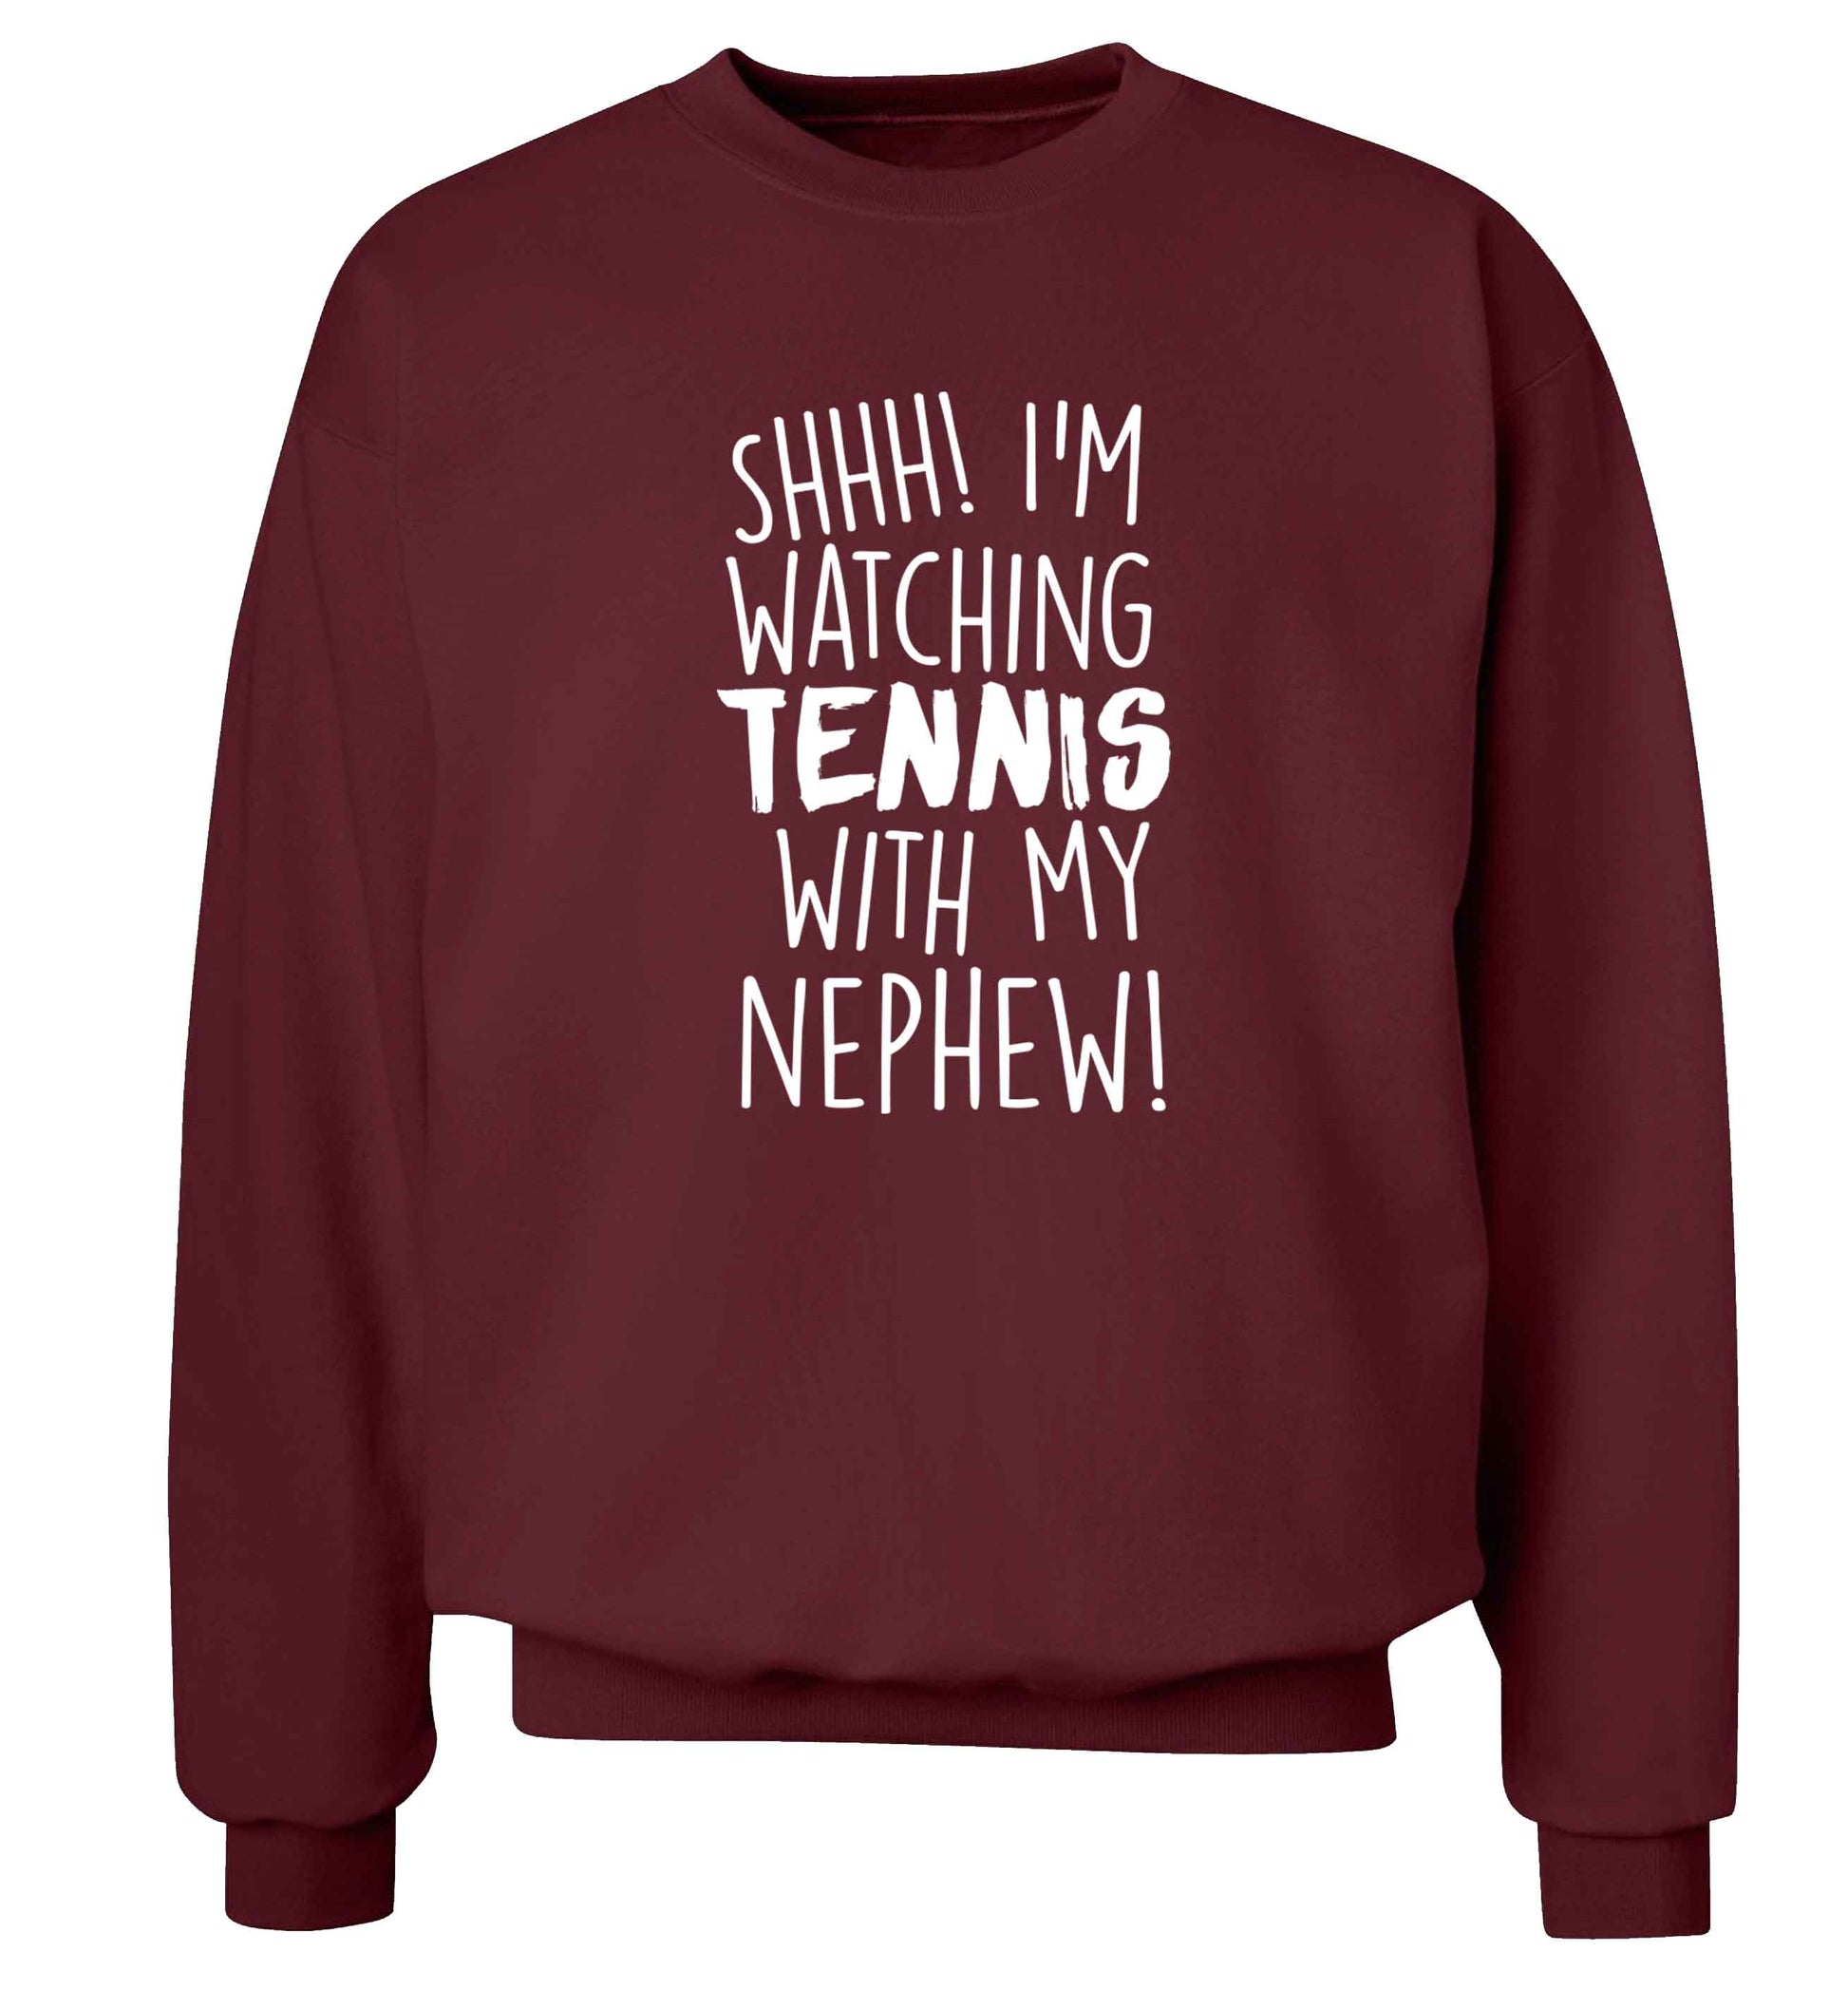 Shh! I'm watching tennis with my nephew! Adult's unisex maroon Sweater 2XL